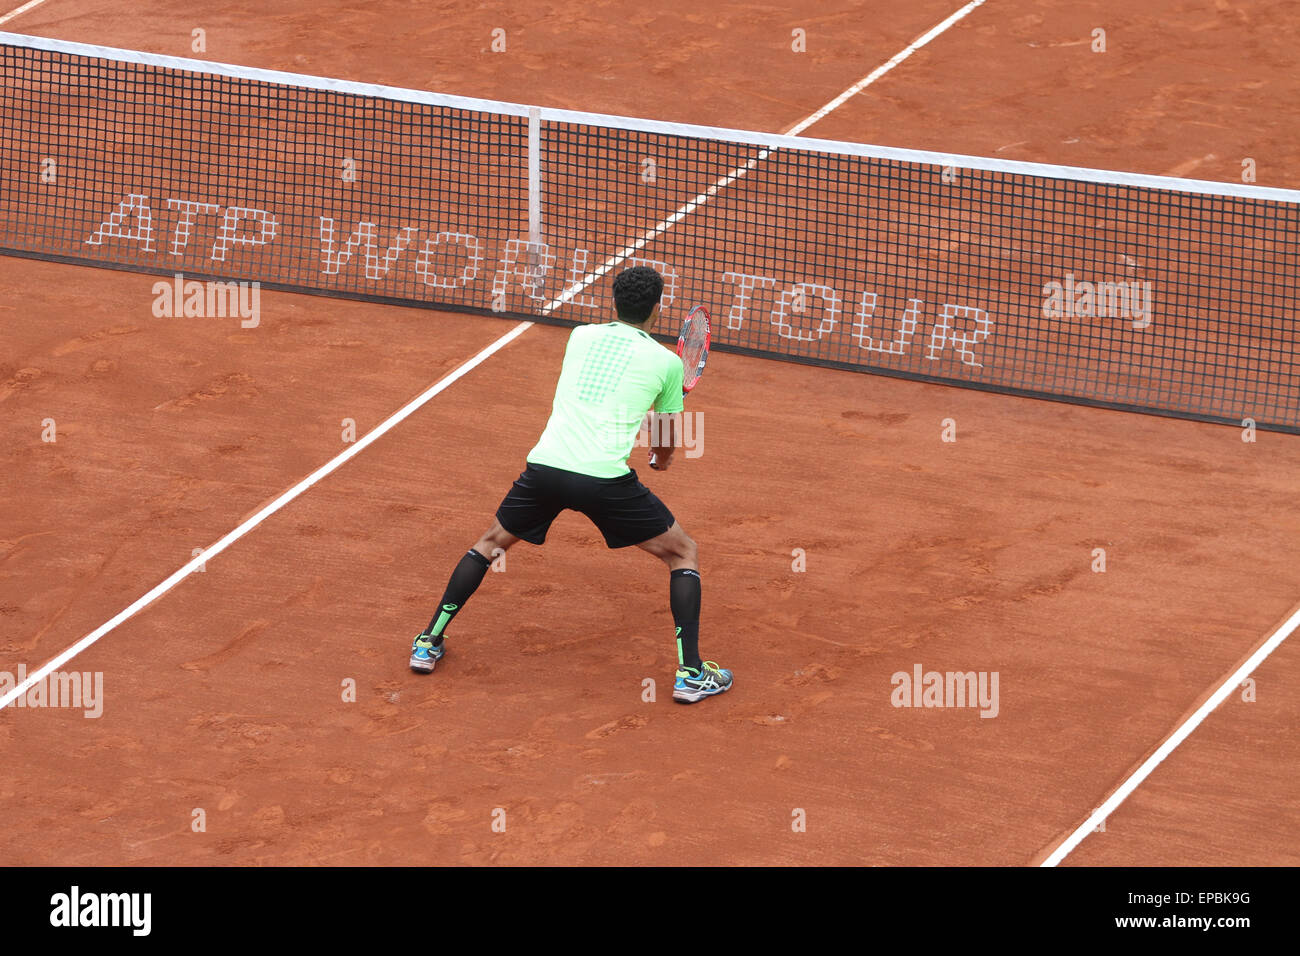 ISTANBUL, TURKEY - MAY 02, 2015: Dusan Lajovic and Radu Albot against Chris Guccione and Andre Sa in doubles semi-final match of Stock Photo